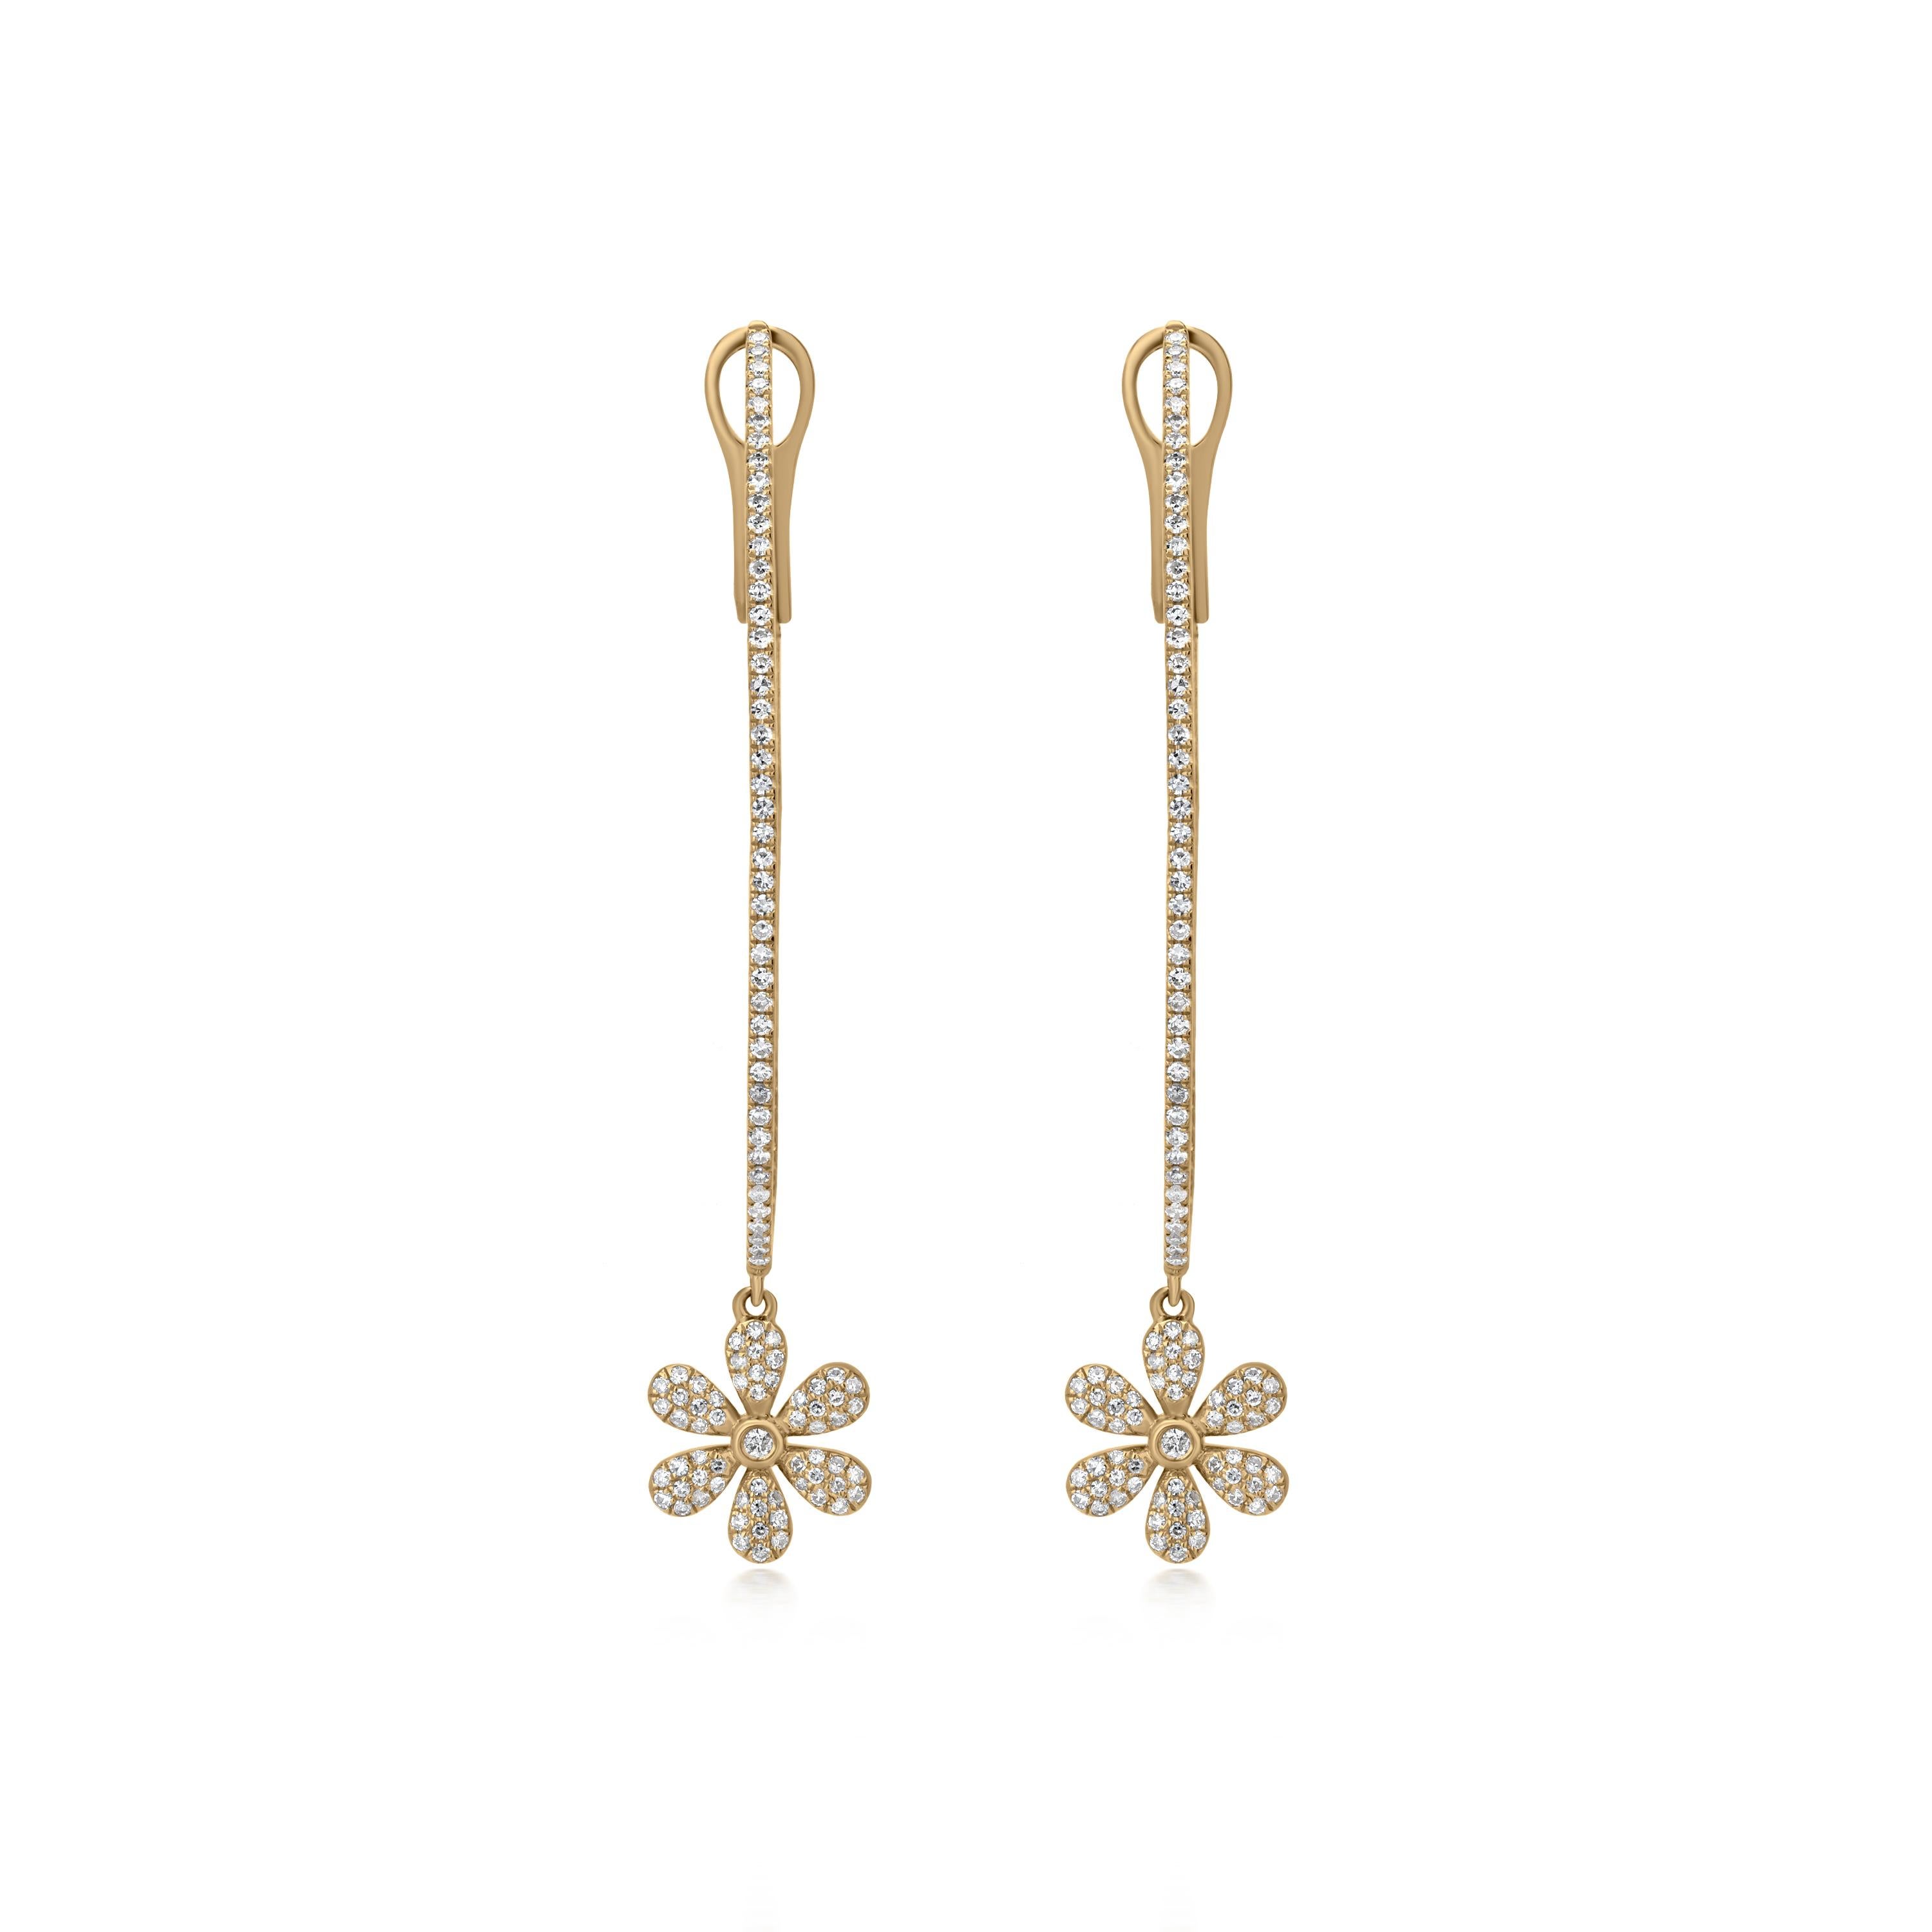 A stunning pair of 18k yellow gold hoop earrings aligned with 266 pave round diamonds adorning inside and outside, as well as a gorgeous flower motif totaling 0.77 carats of diamonds framed within pave set, it has come with omega backs. The diamonds